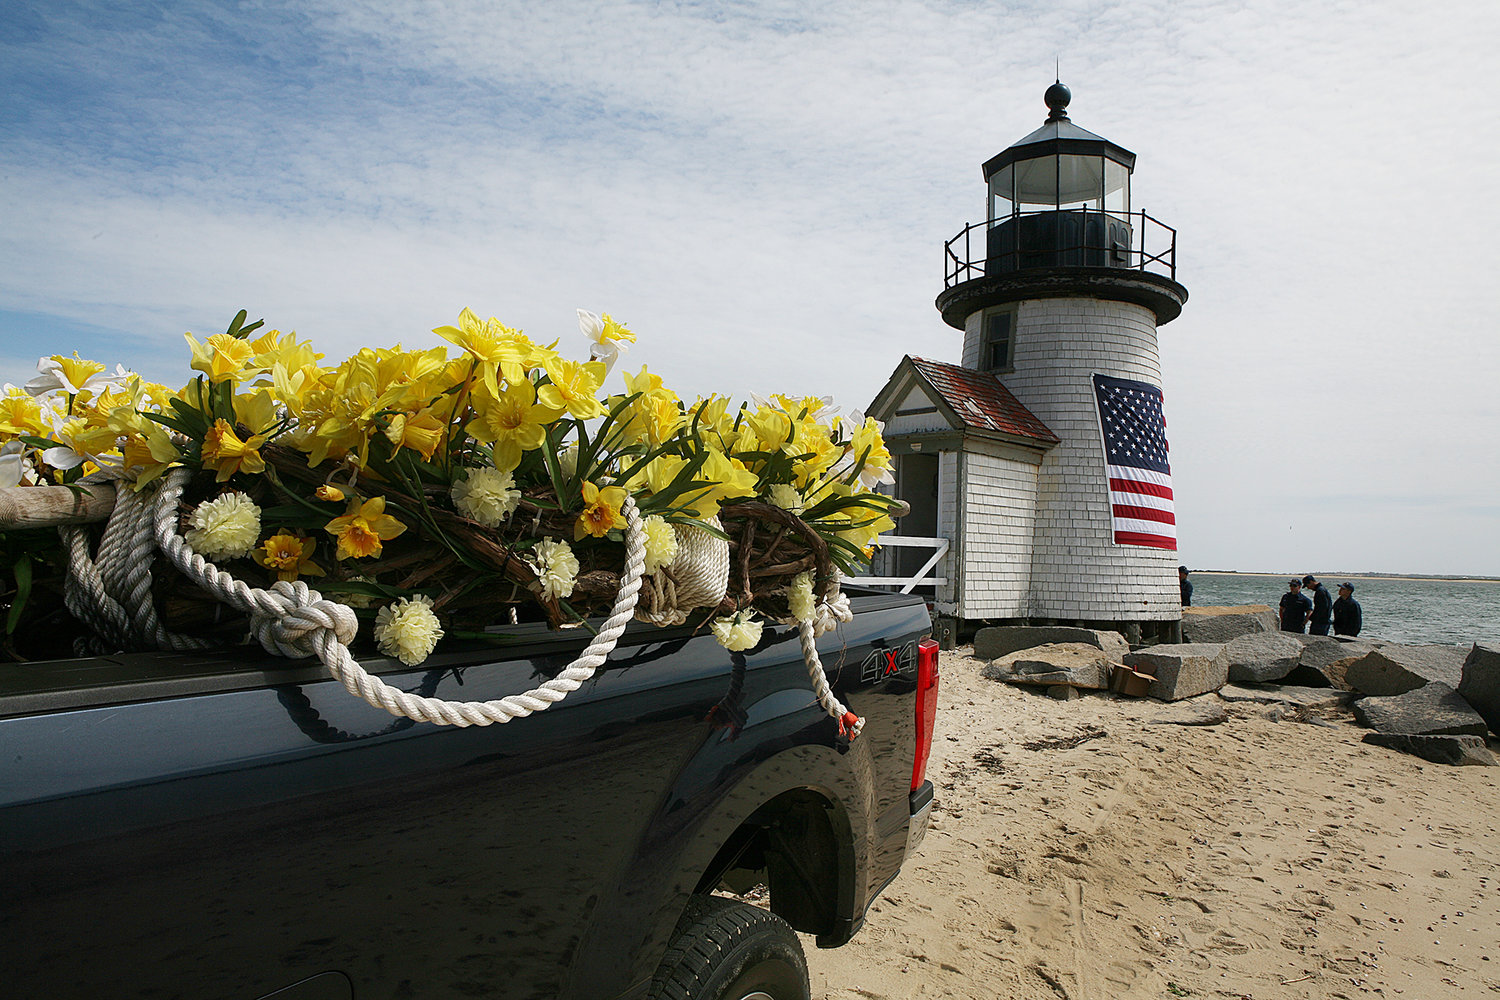 MAY 28, 2021 -- The daffodil wreath is in the back of a truck after a crew from the US Coast Guard Station Brant Point took down the daffodil wreath and replaced it with a flag in honor of Memorial Day and the Fourth of July at the Brant Point lighthouse.